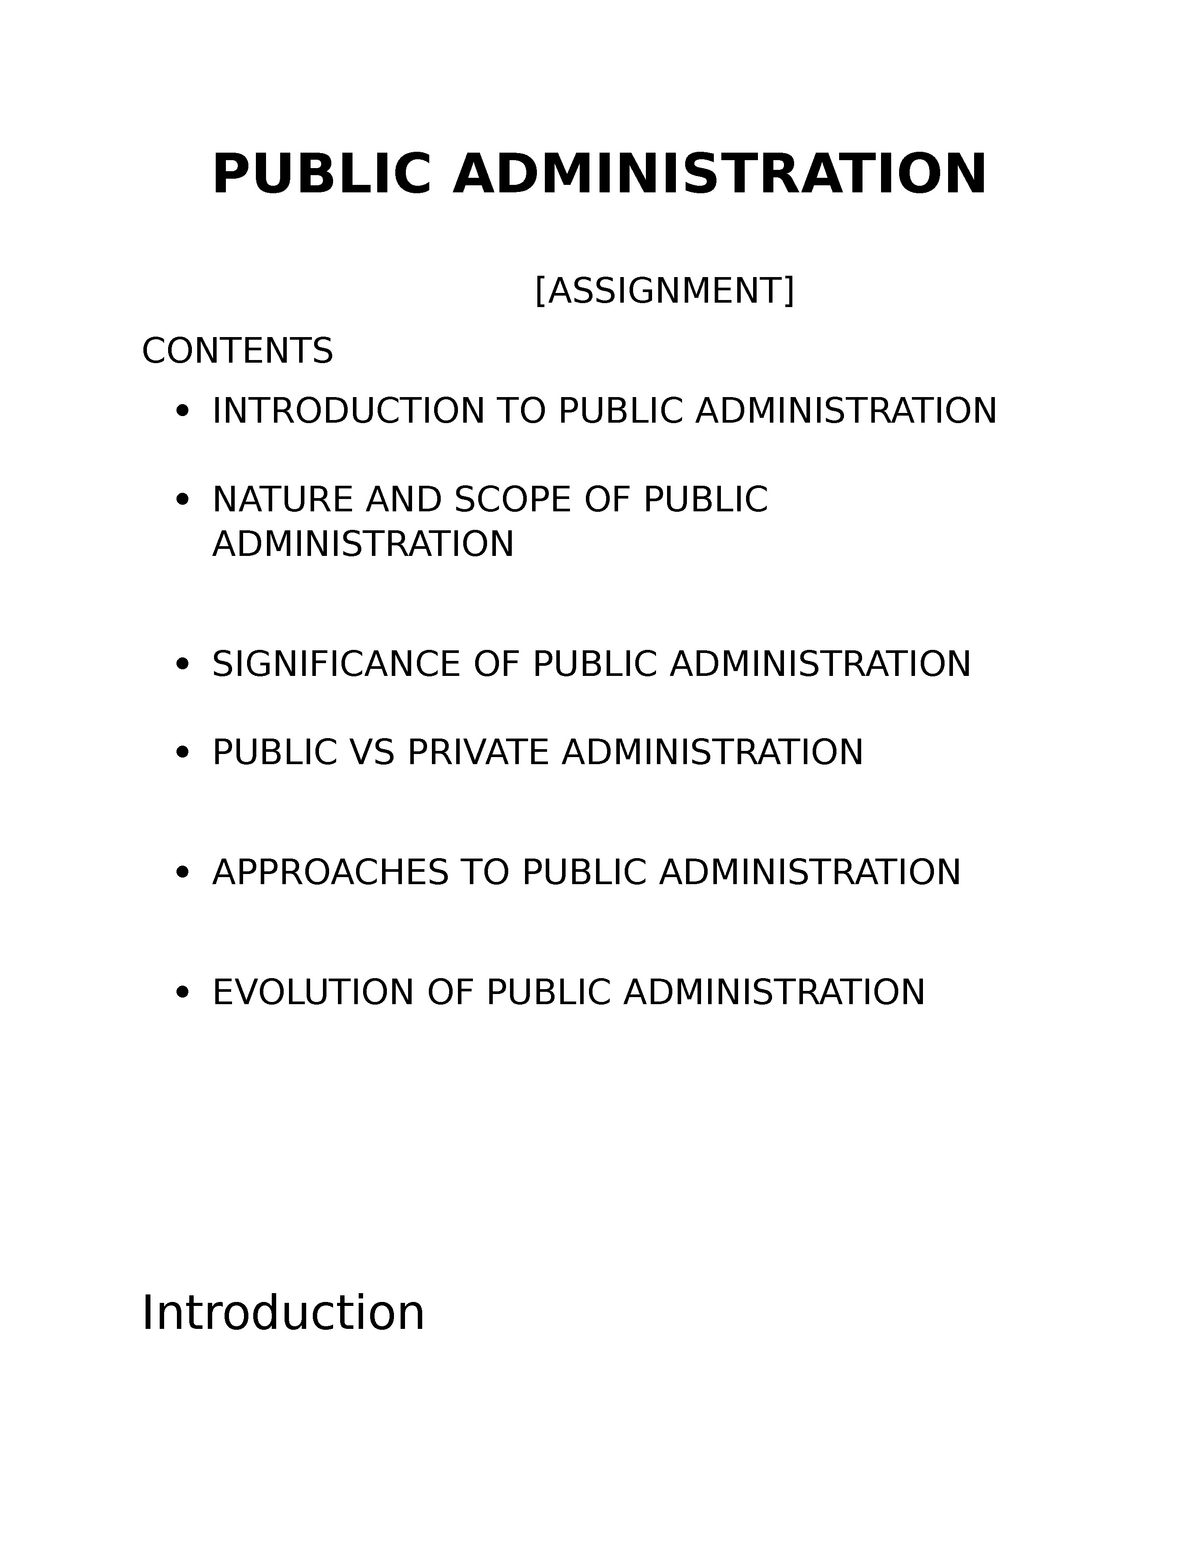 thesis topic for public administration